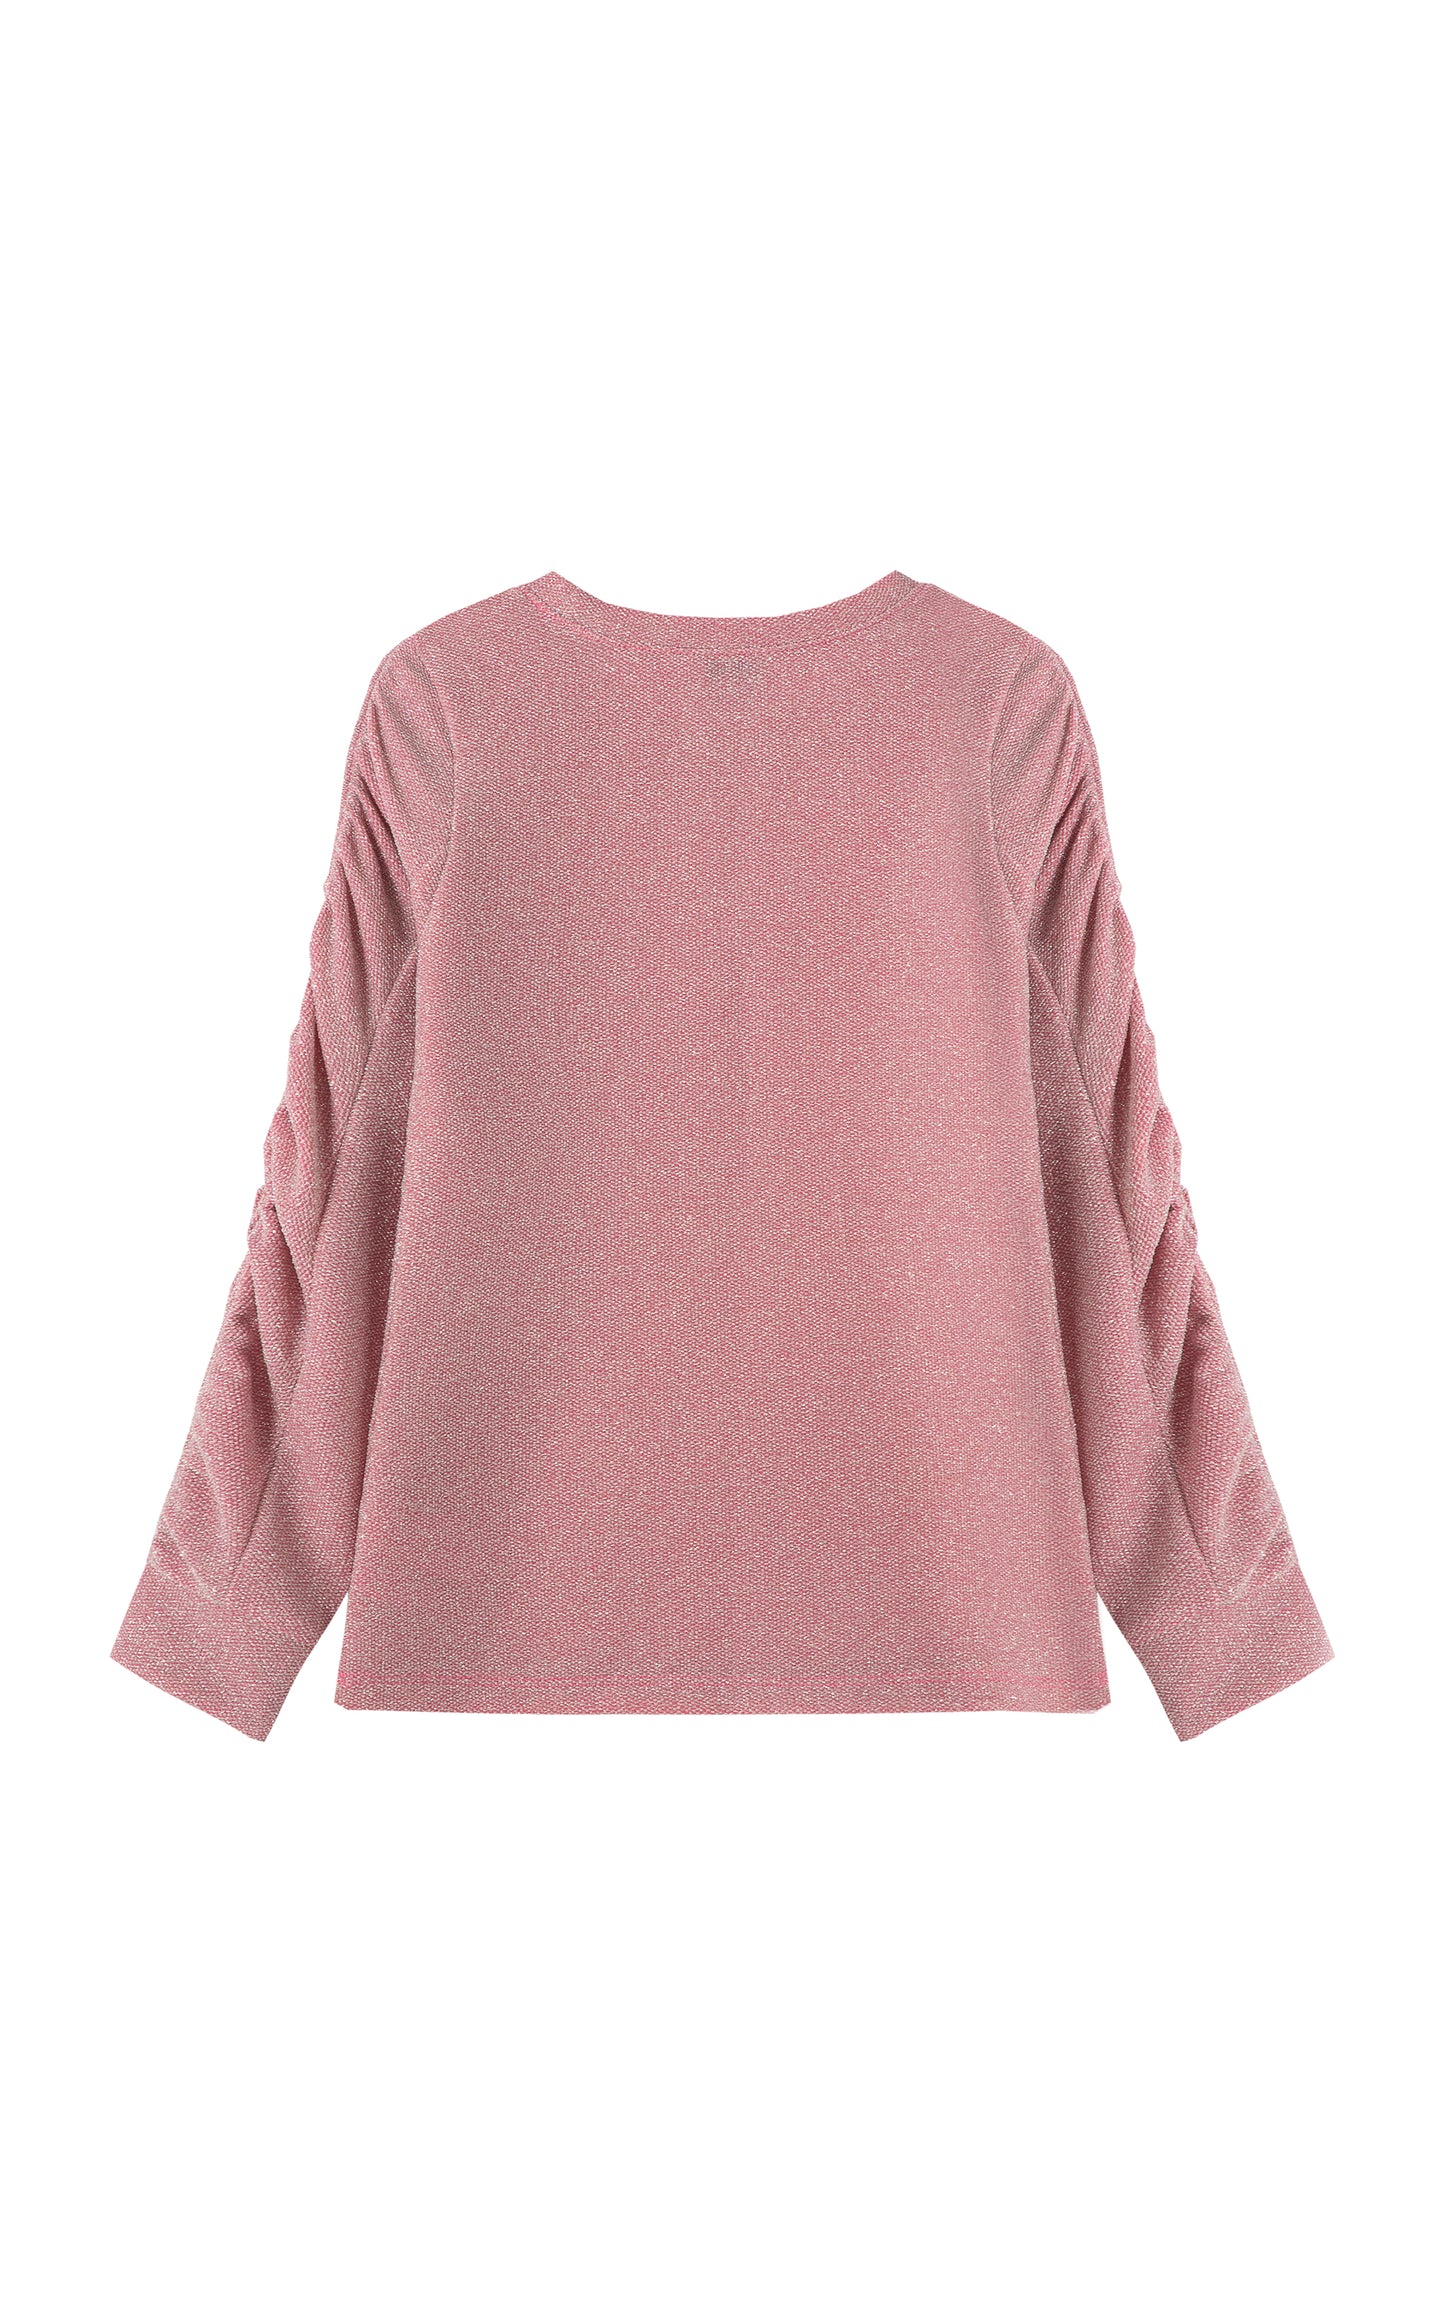 Back view of light pink crewneck top with metallic accents and gathered, long sleeves.